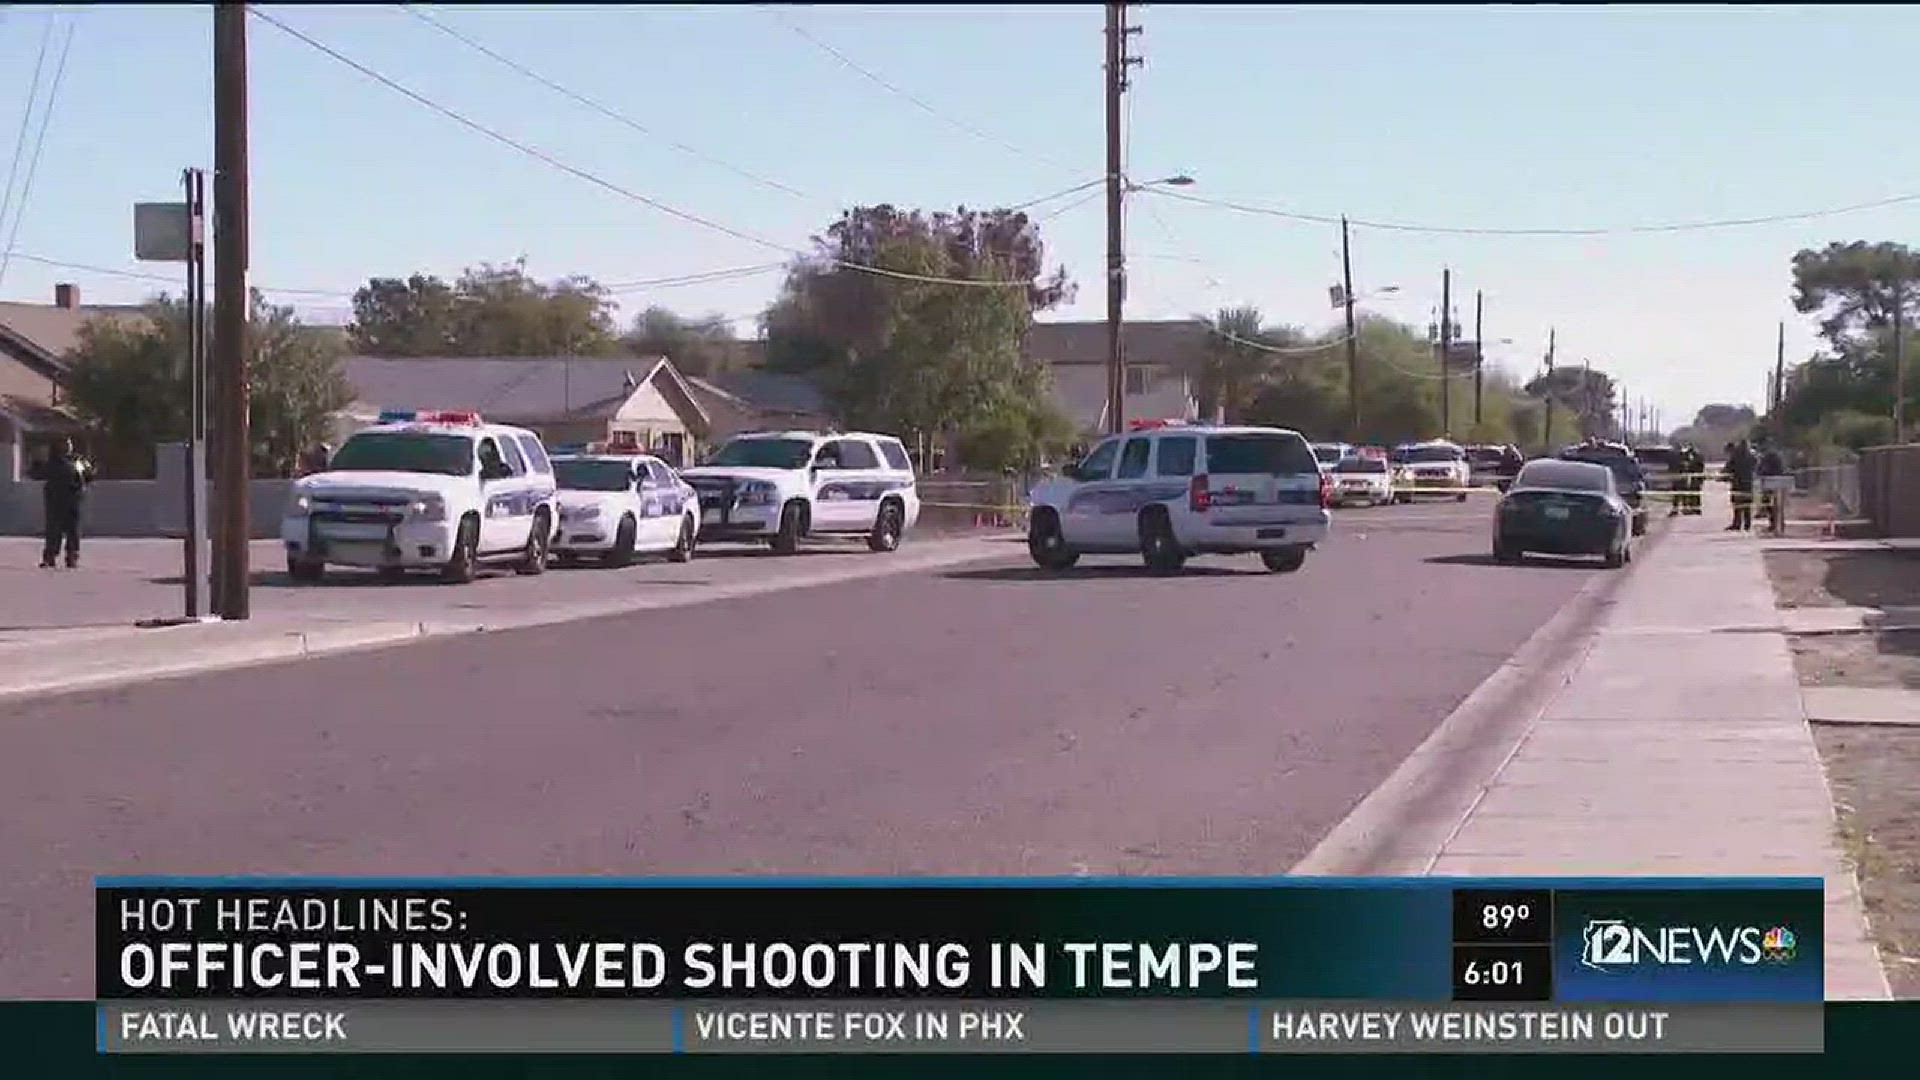 Tempe and Phoenix police departments worked together to arrest a carjacking suspect who ran from police and shot at officers Saturday morning.